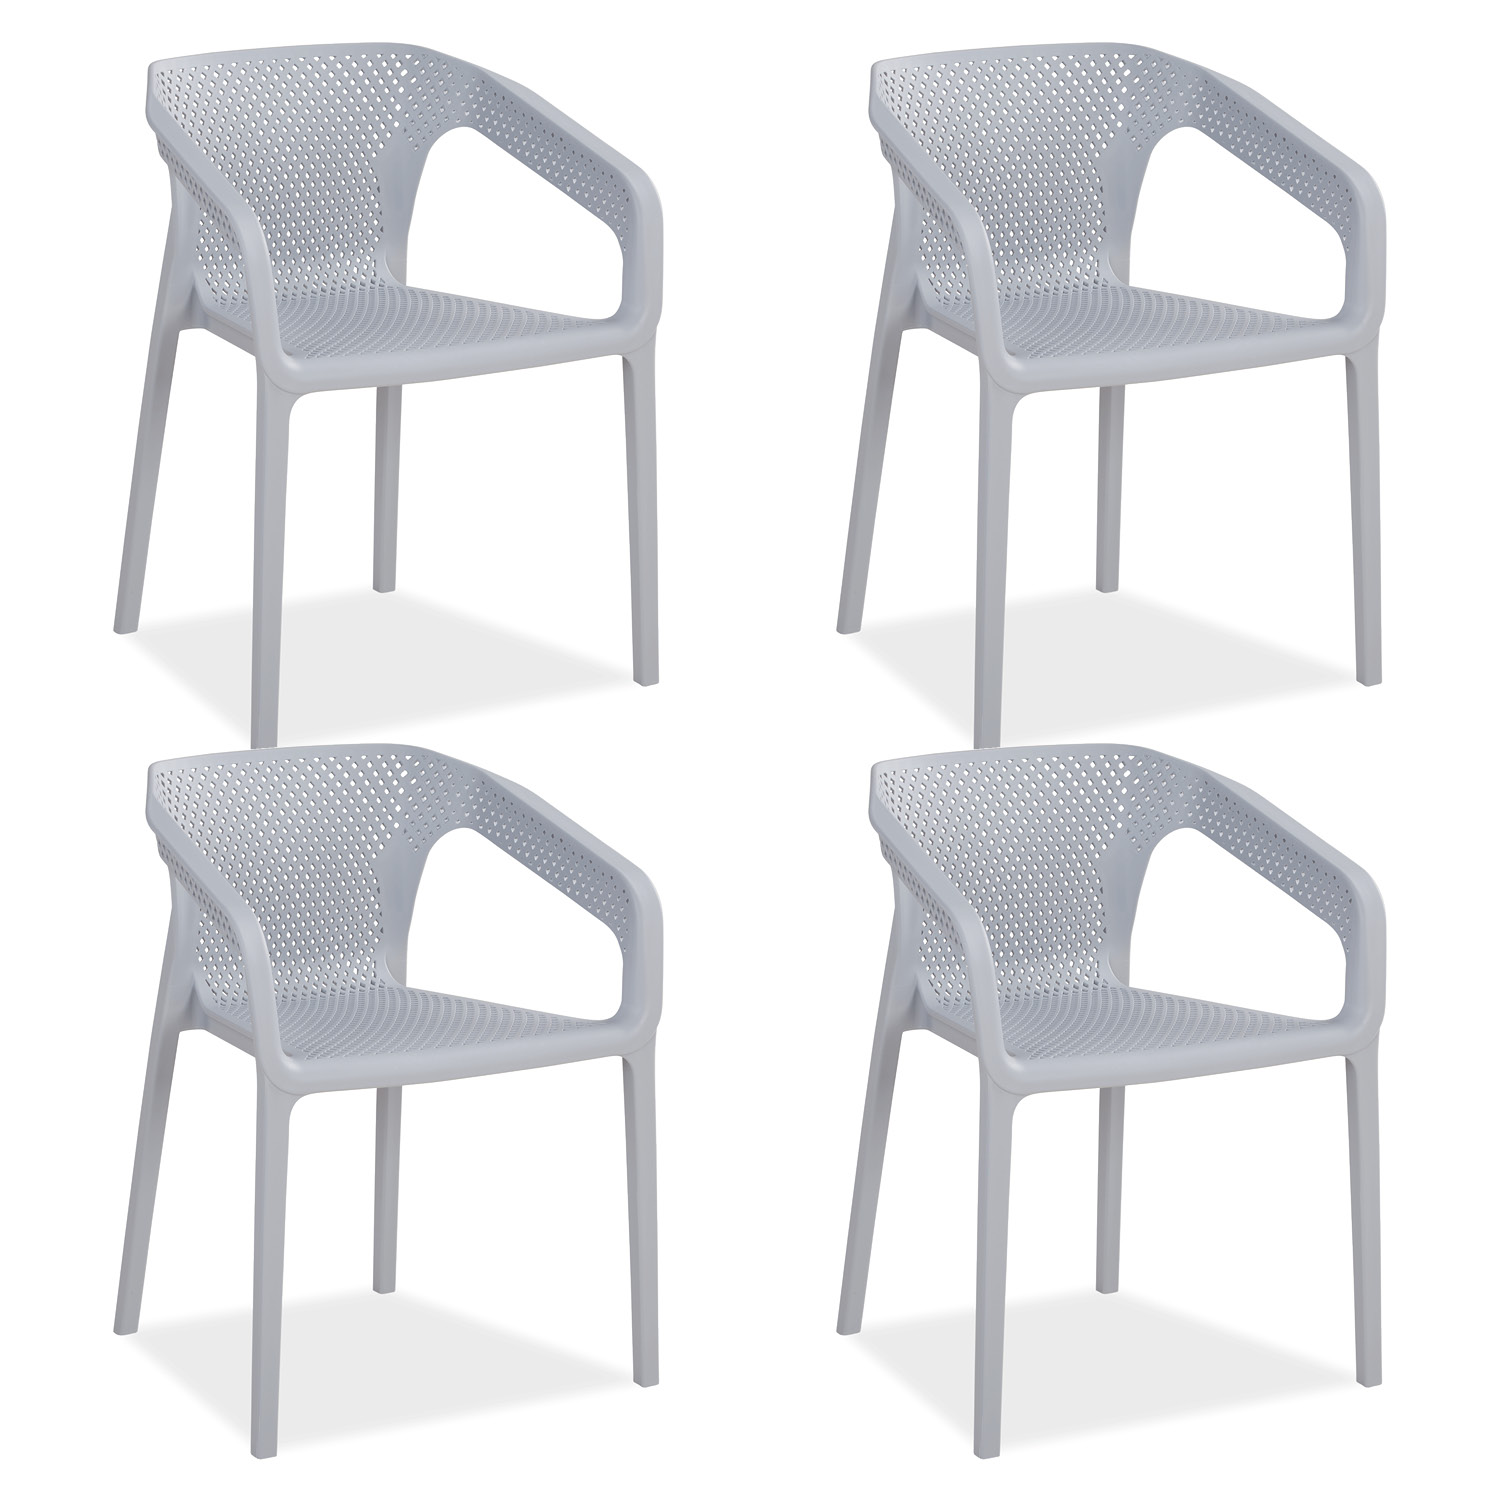 Set of 4 Garden chair with armrests Camping chairs Grey Outdoor chairs Plastic Egg chair Lounger chairs Stacking chairs